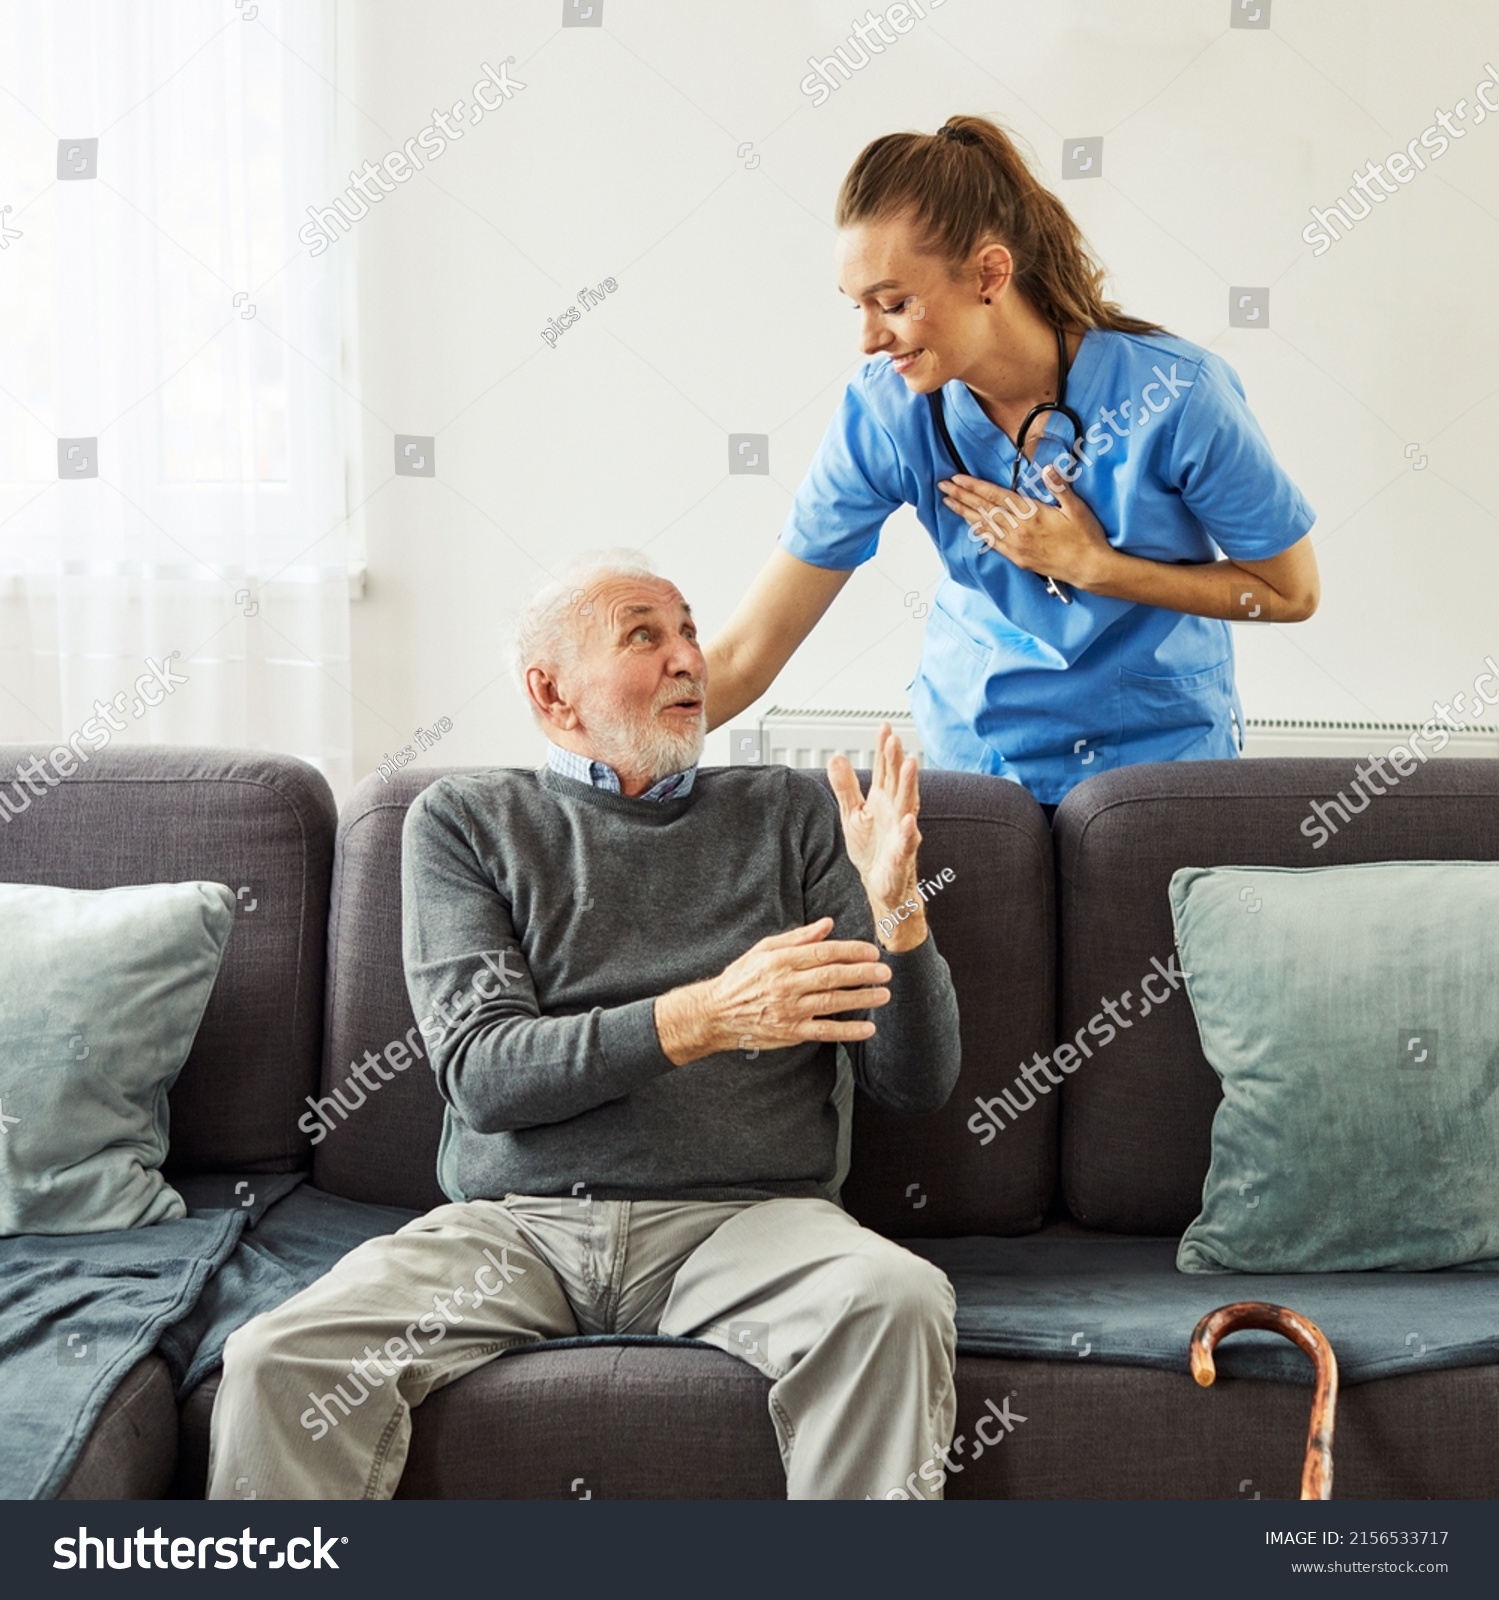 Doctor Nurse Caregivers Hand Giving Support Stock Photo 2156533717 ...